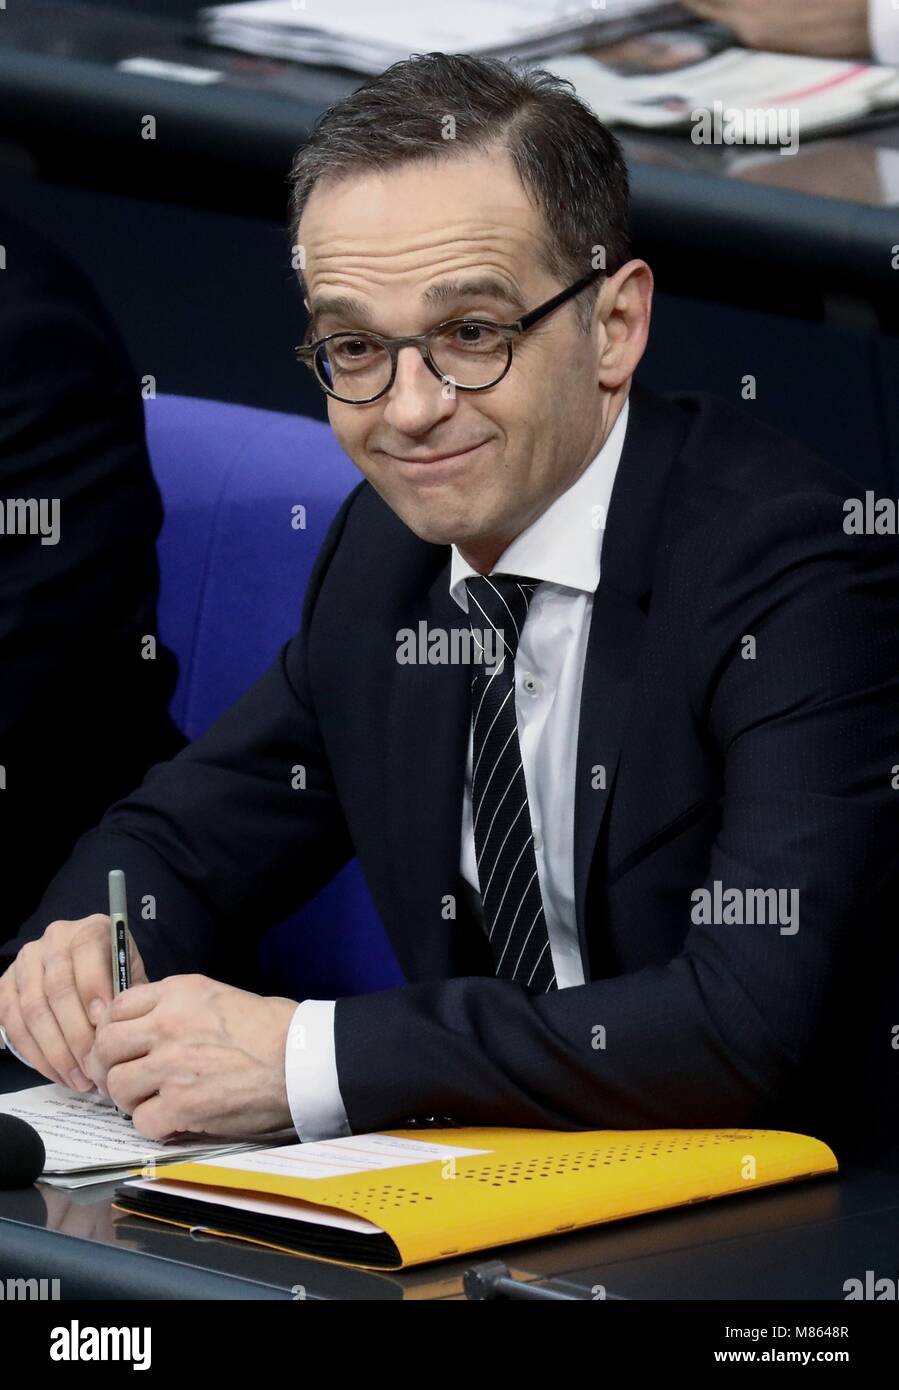 15 March 2018, Germany, Berlin: Heiko Maas (SPD), Foreign Minister, taking part in a session of the Bundestag (Federal Legislature). The parliamentary session's order of the day includes, among other things, adjudications for the continuation of Bundeswehr (Federal Armed Forces) deployments in Iraq, Afghanistan, South Sudan and Darfur, as well as the abolition of the exception solidarity contribution and modifications to the Labour Law. Photo: Kay Nietfeld/dpa Stock Photo